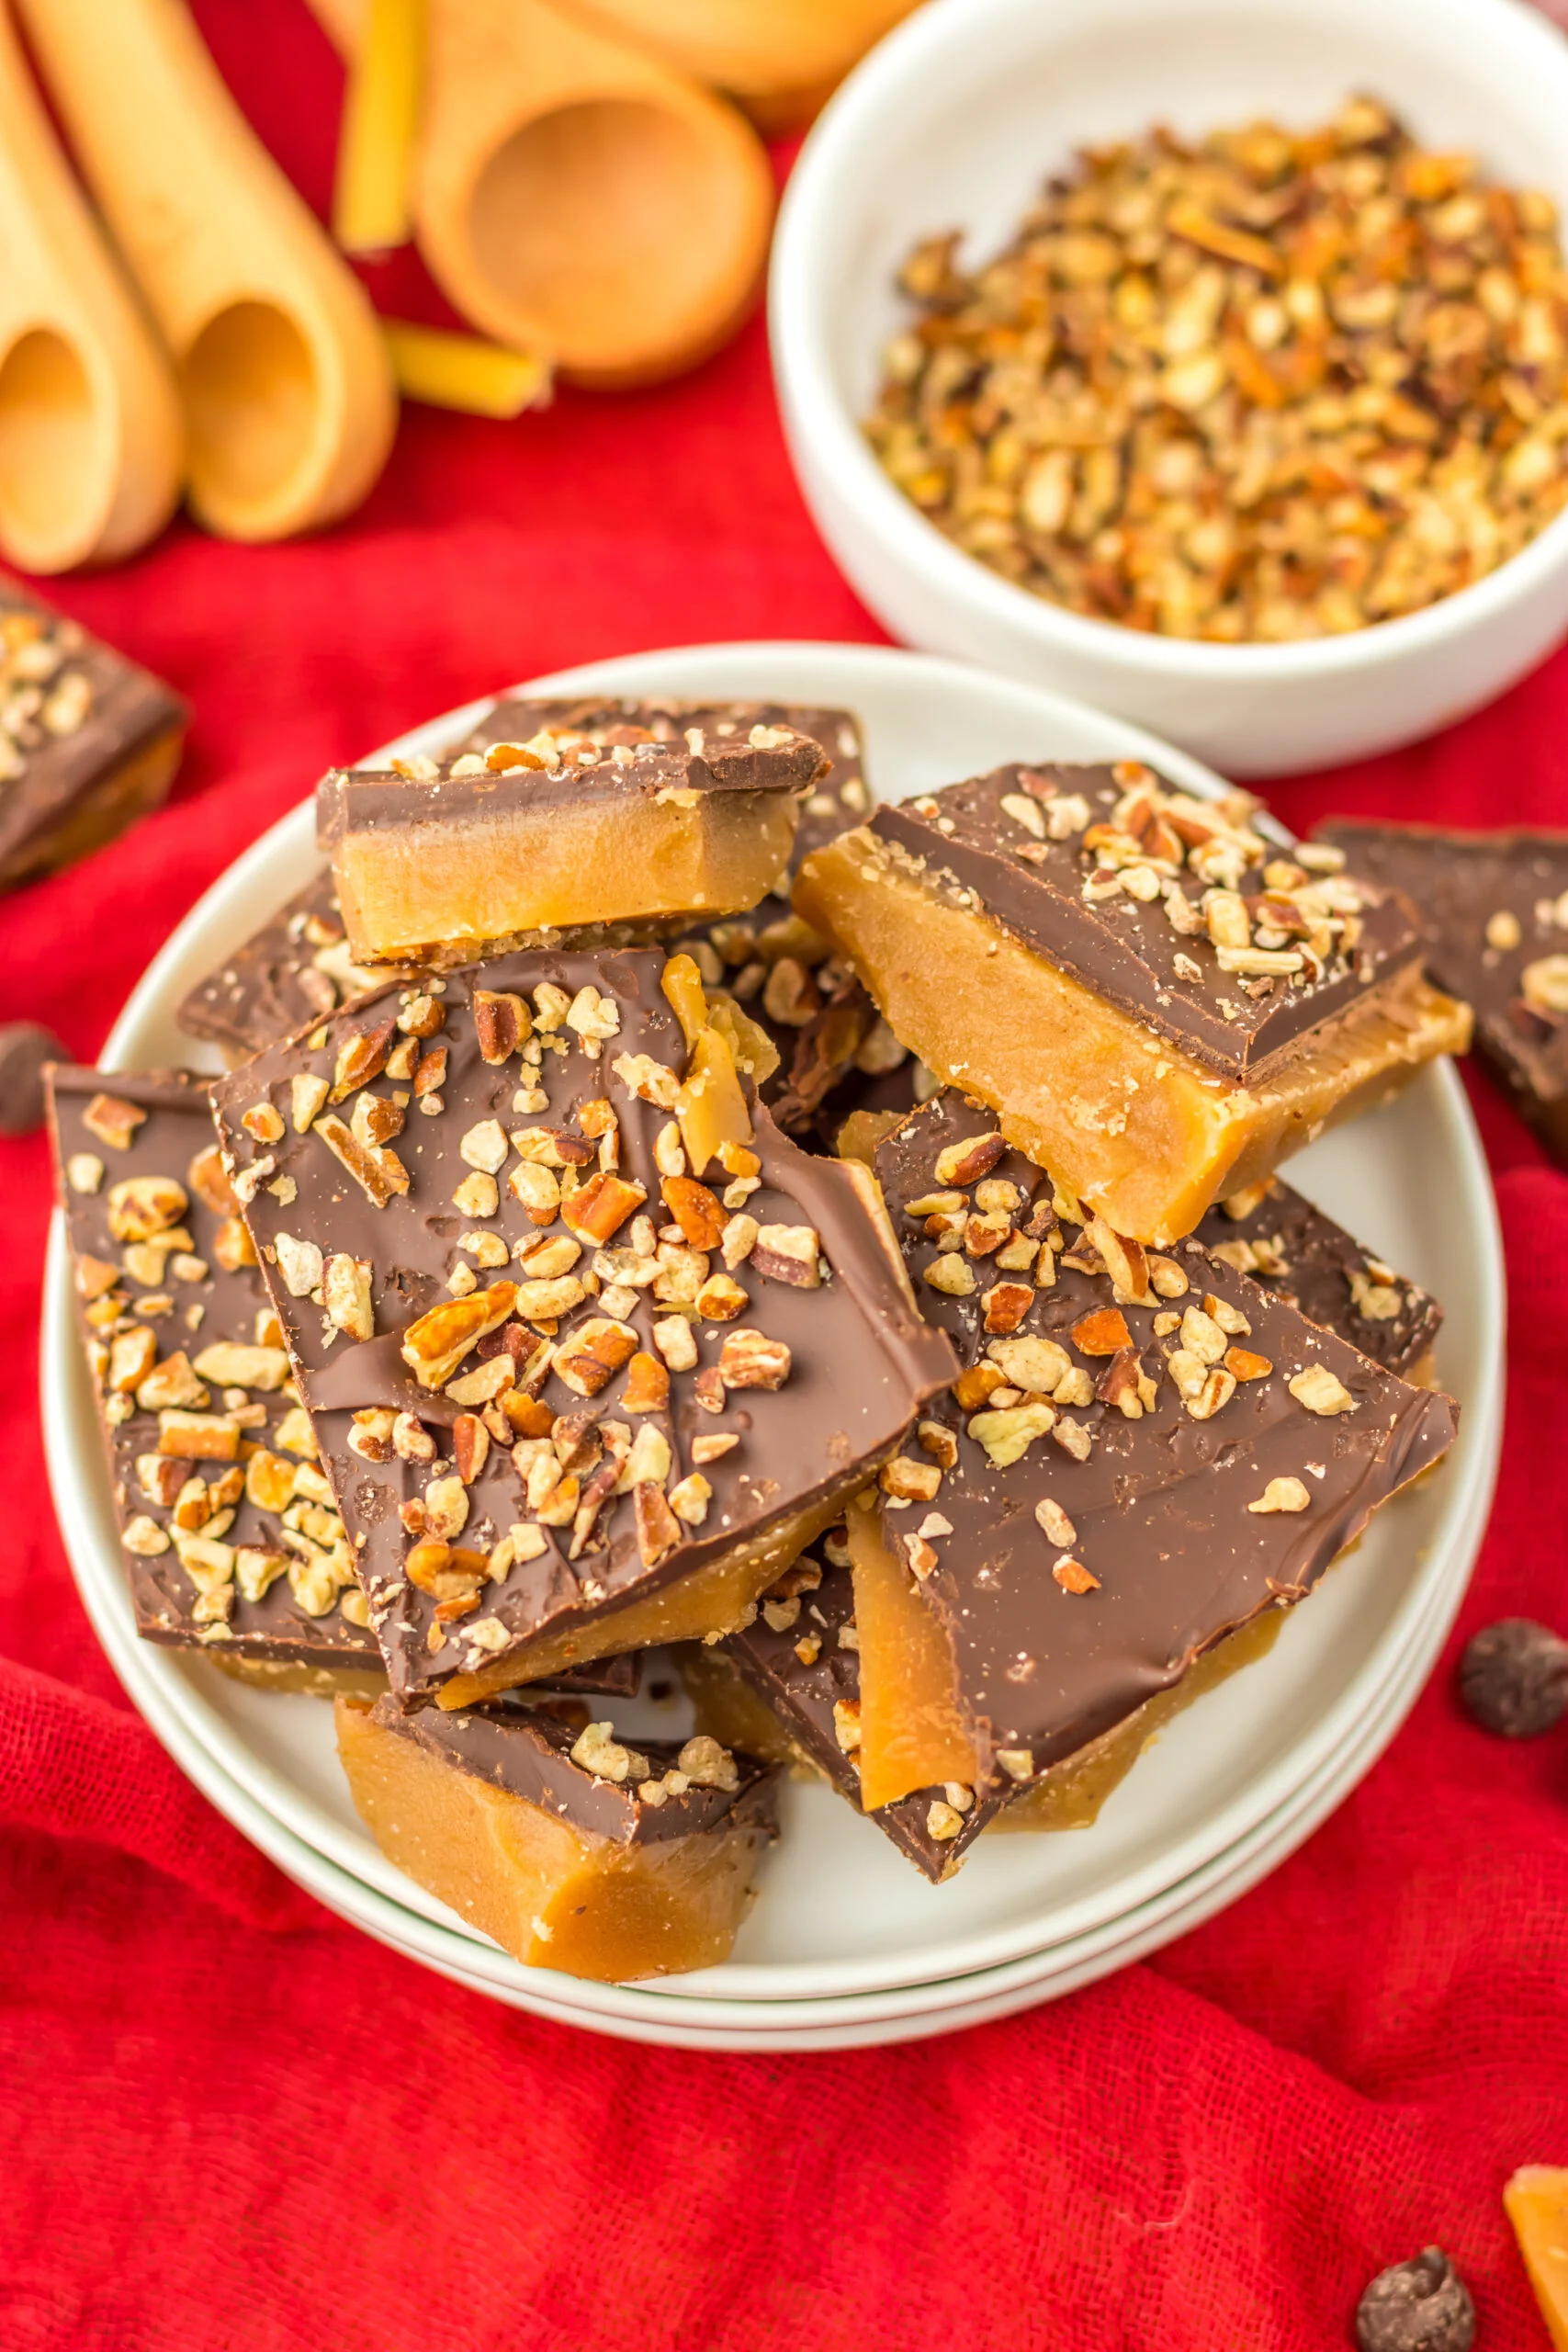 Classic English Toffee